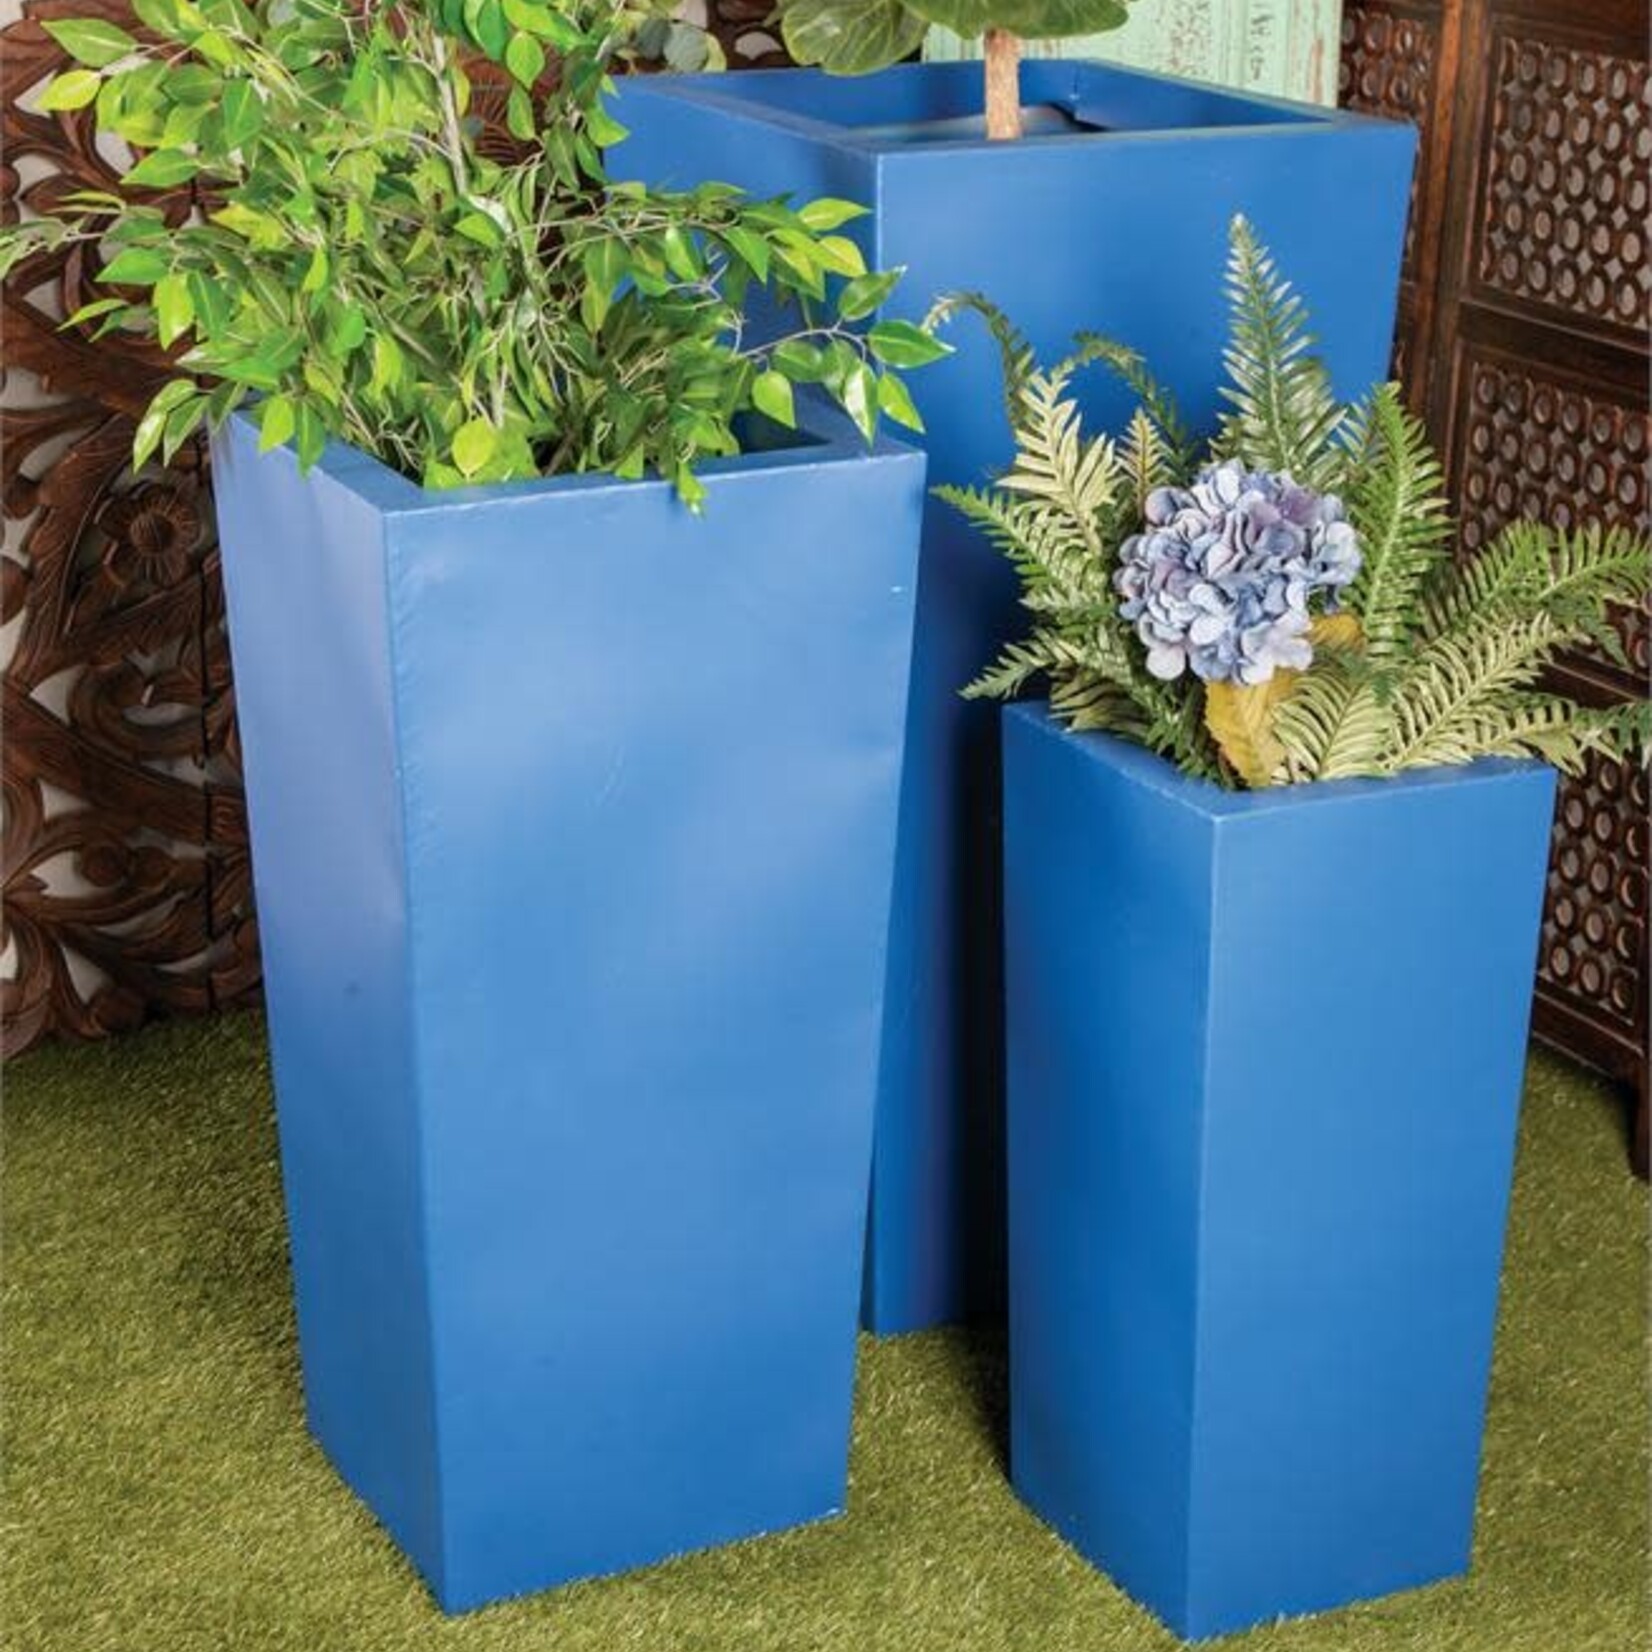 60% off was $230 now $92.00, 42”H X 21” BLUE TAPER METAL PLANTERS